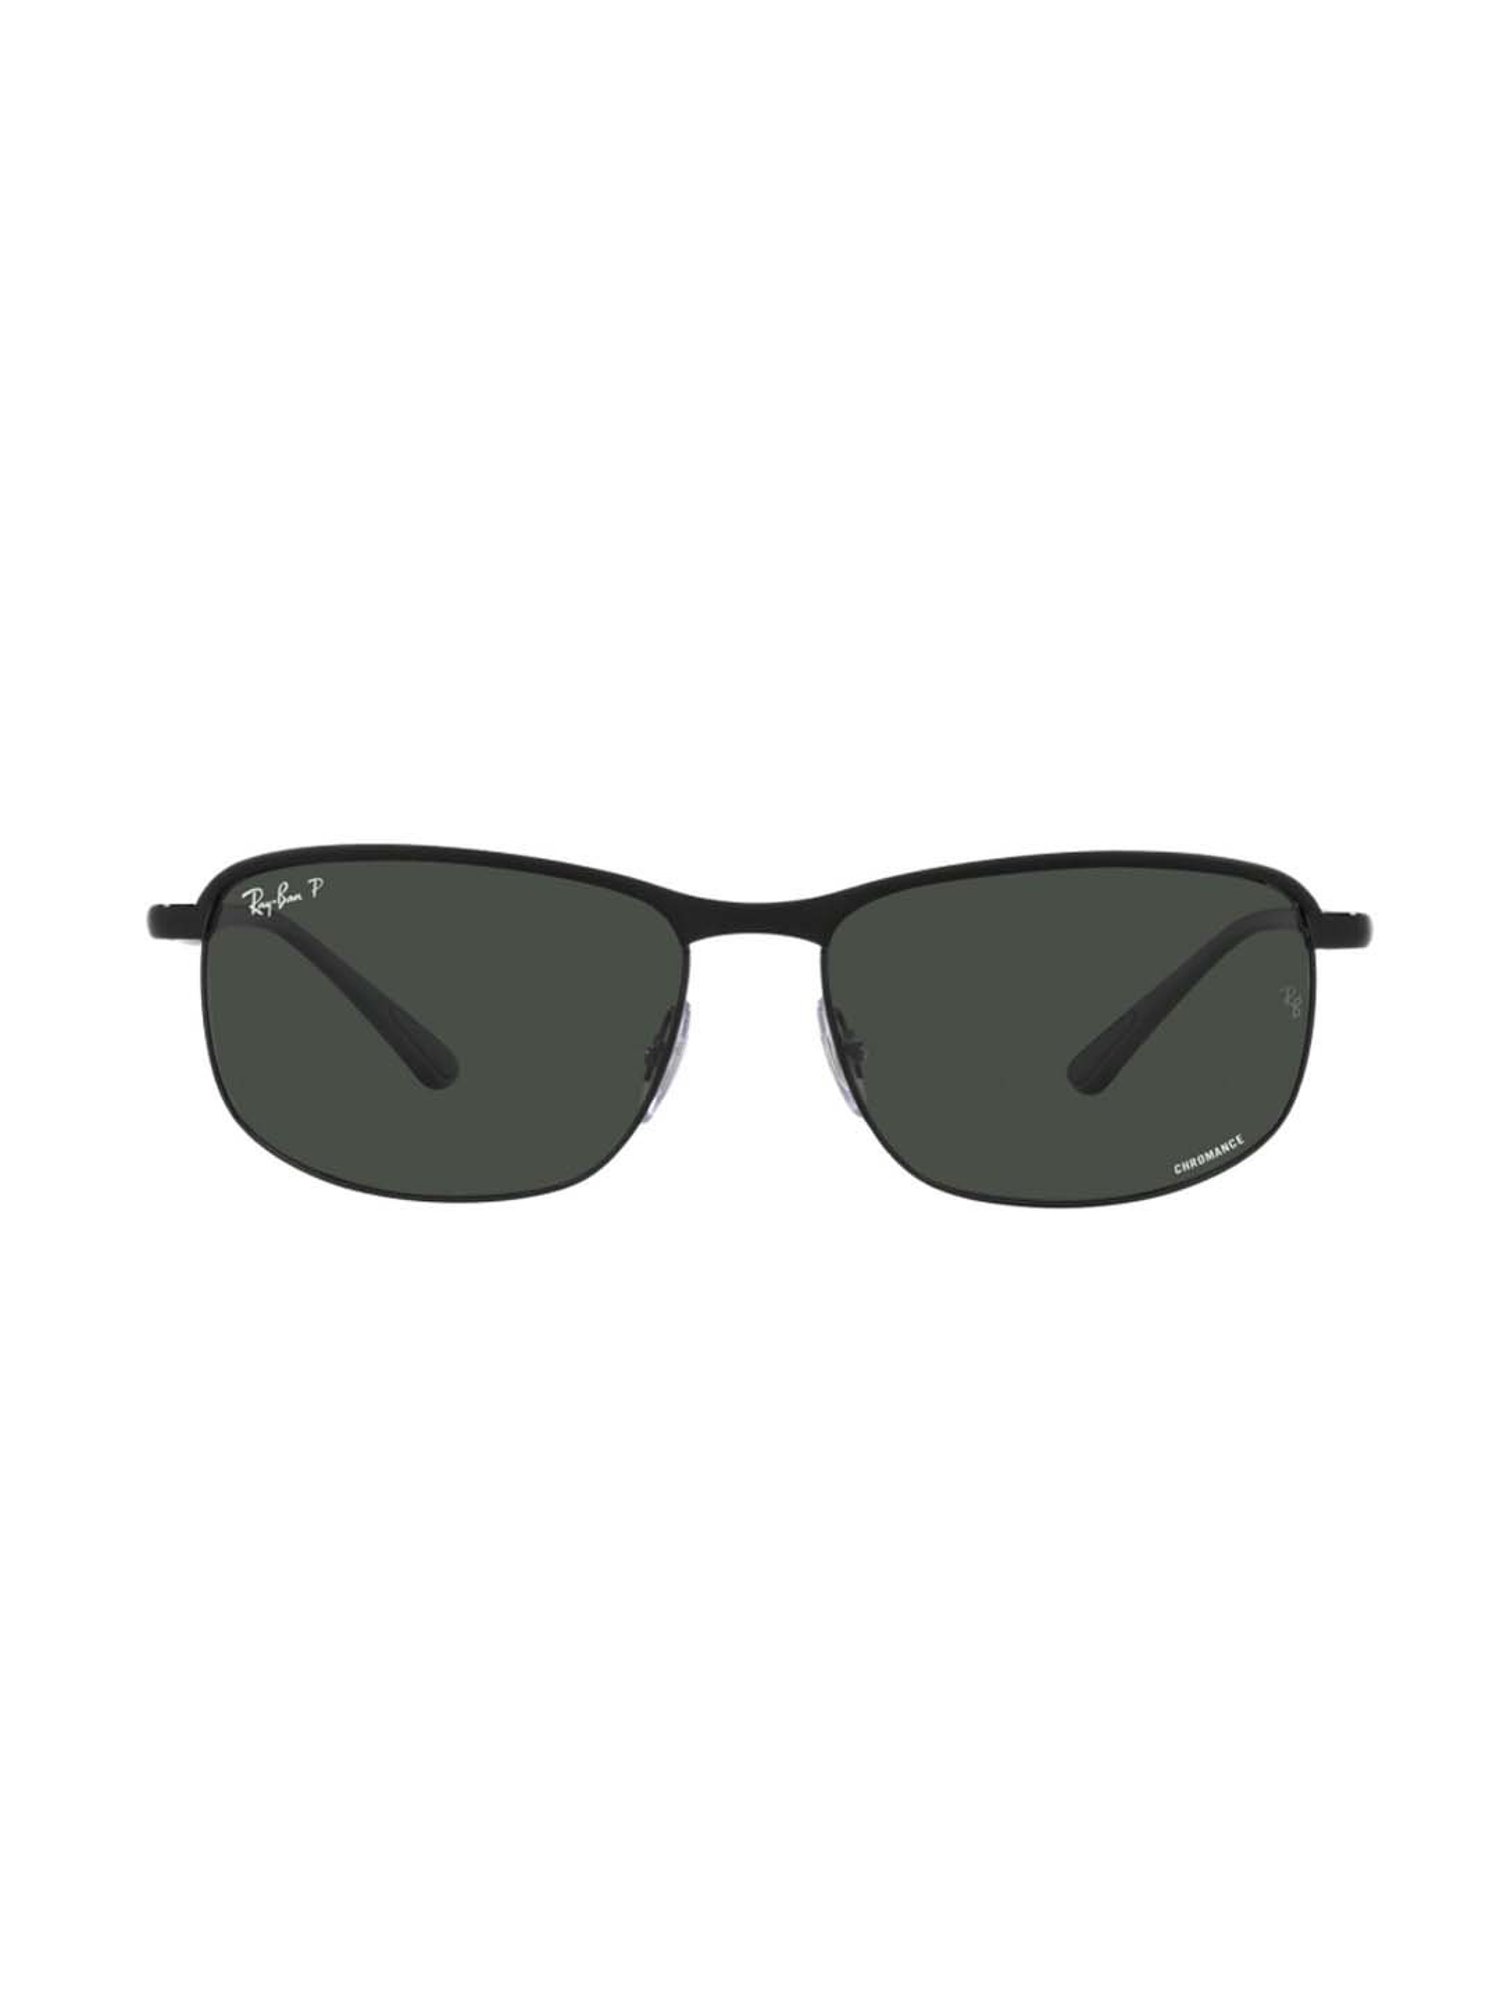 Ray Ban Polarized Lenses . Admired by The Jetzy Life www.JetzyBags.com |  Gafas, Accesorios, Carteras